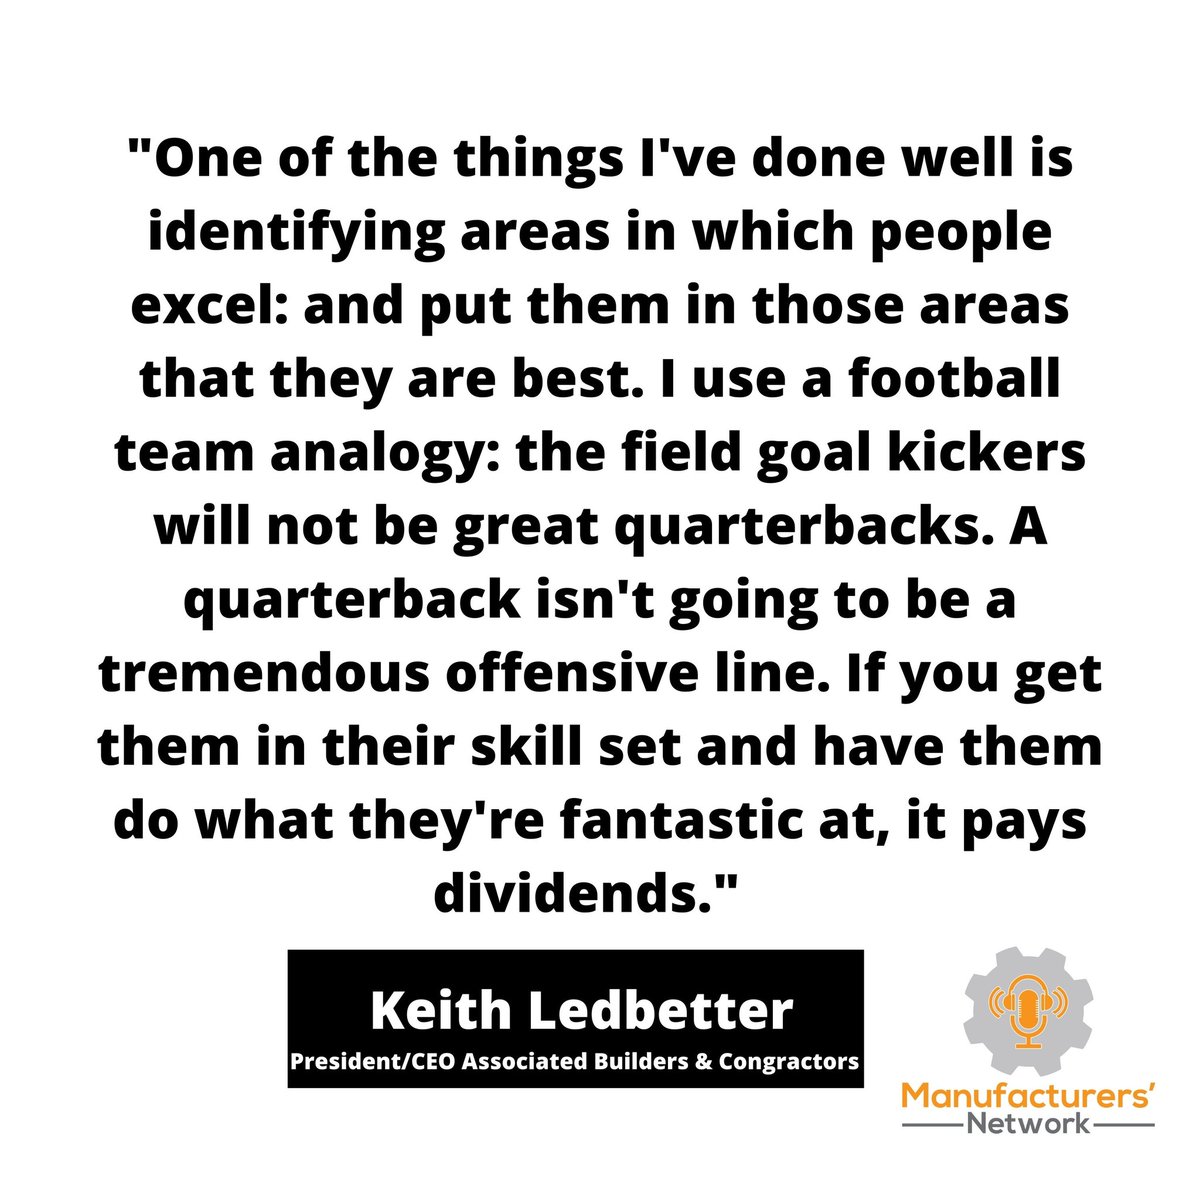 Listen in as @Keith Ledbetter and I talk about attracting the right #talent to join your organization on this episode of the #ManufacturersNetwork #podcast: player.captivate.fm/episode/88638b…